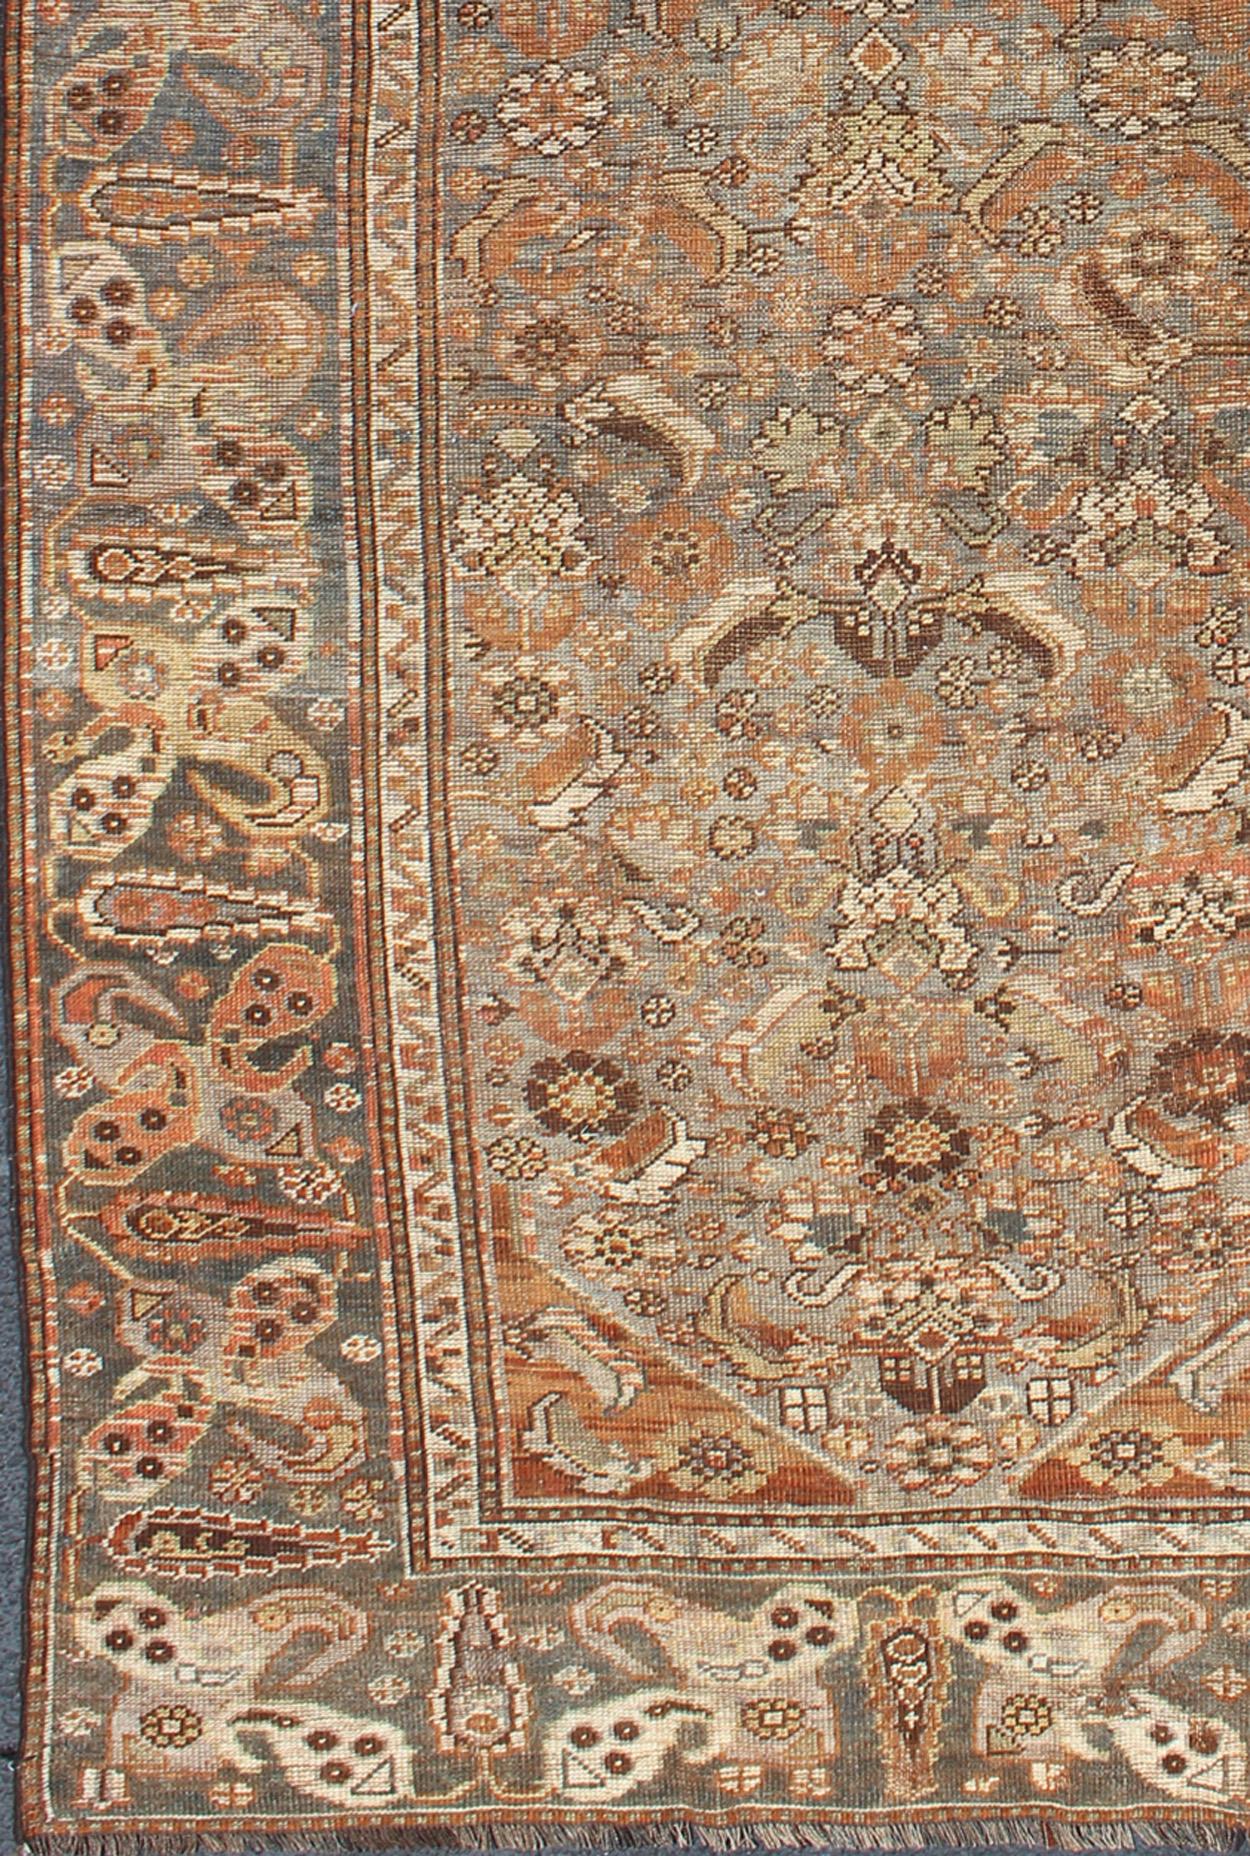 Qashqai Persian antique carpet in natural color tones with stylized sub-geometric design, rug ema-7560, country of origin / type: Iran / Qashqai, circa 1910.

The Qashqai nomads are found in the Fars province in southwest Iran. They move twice a